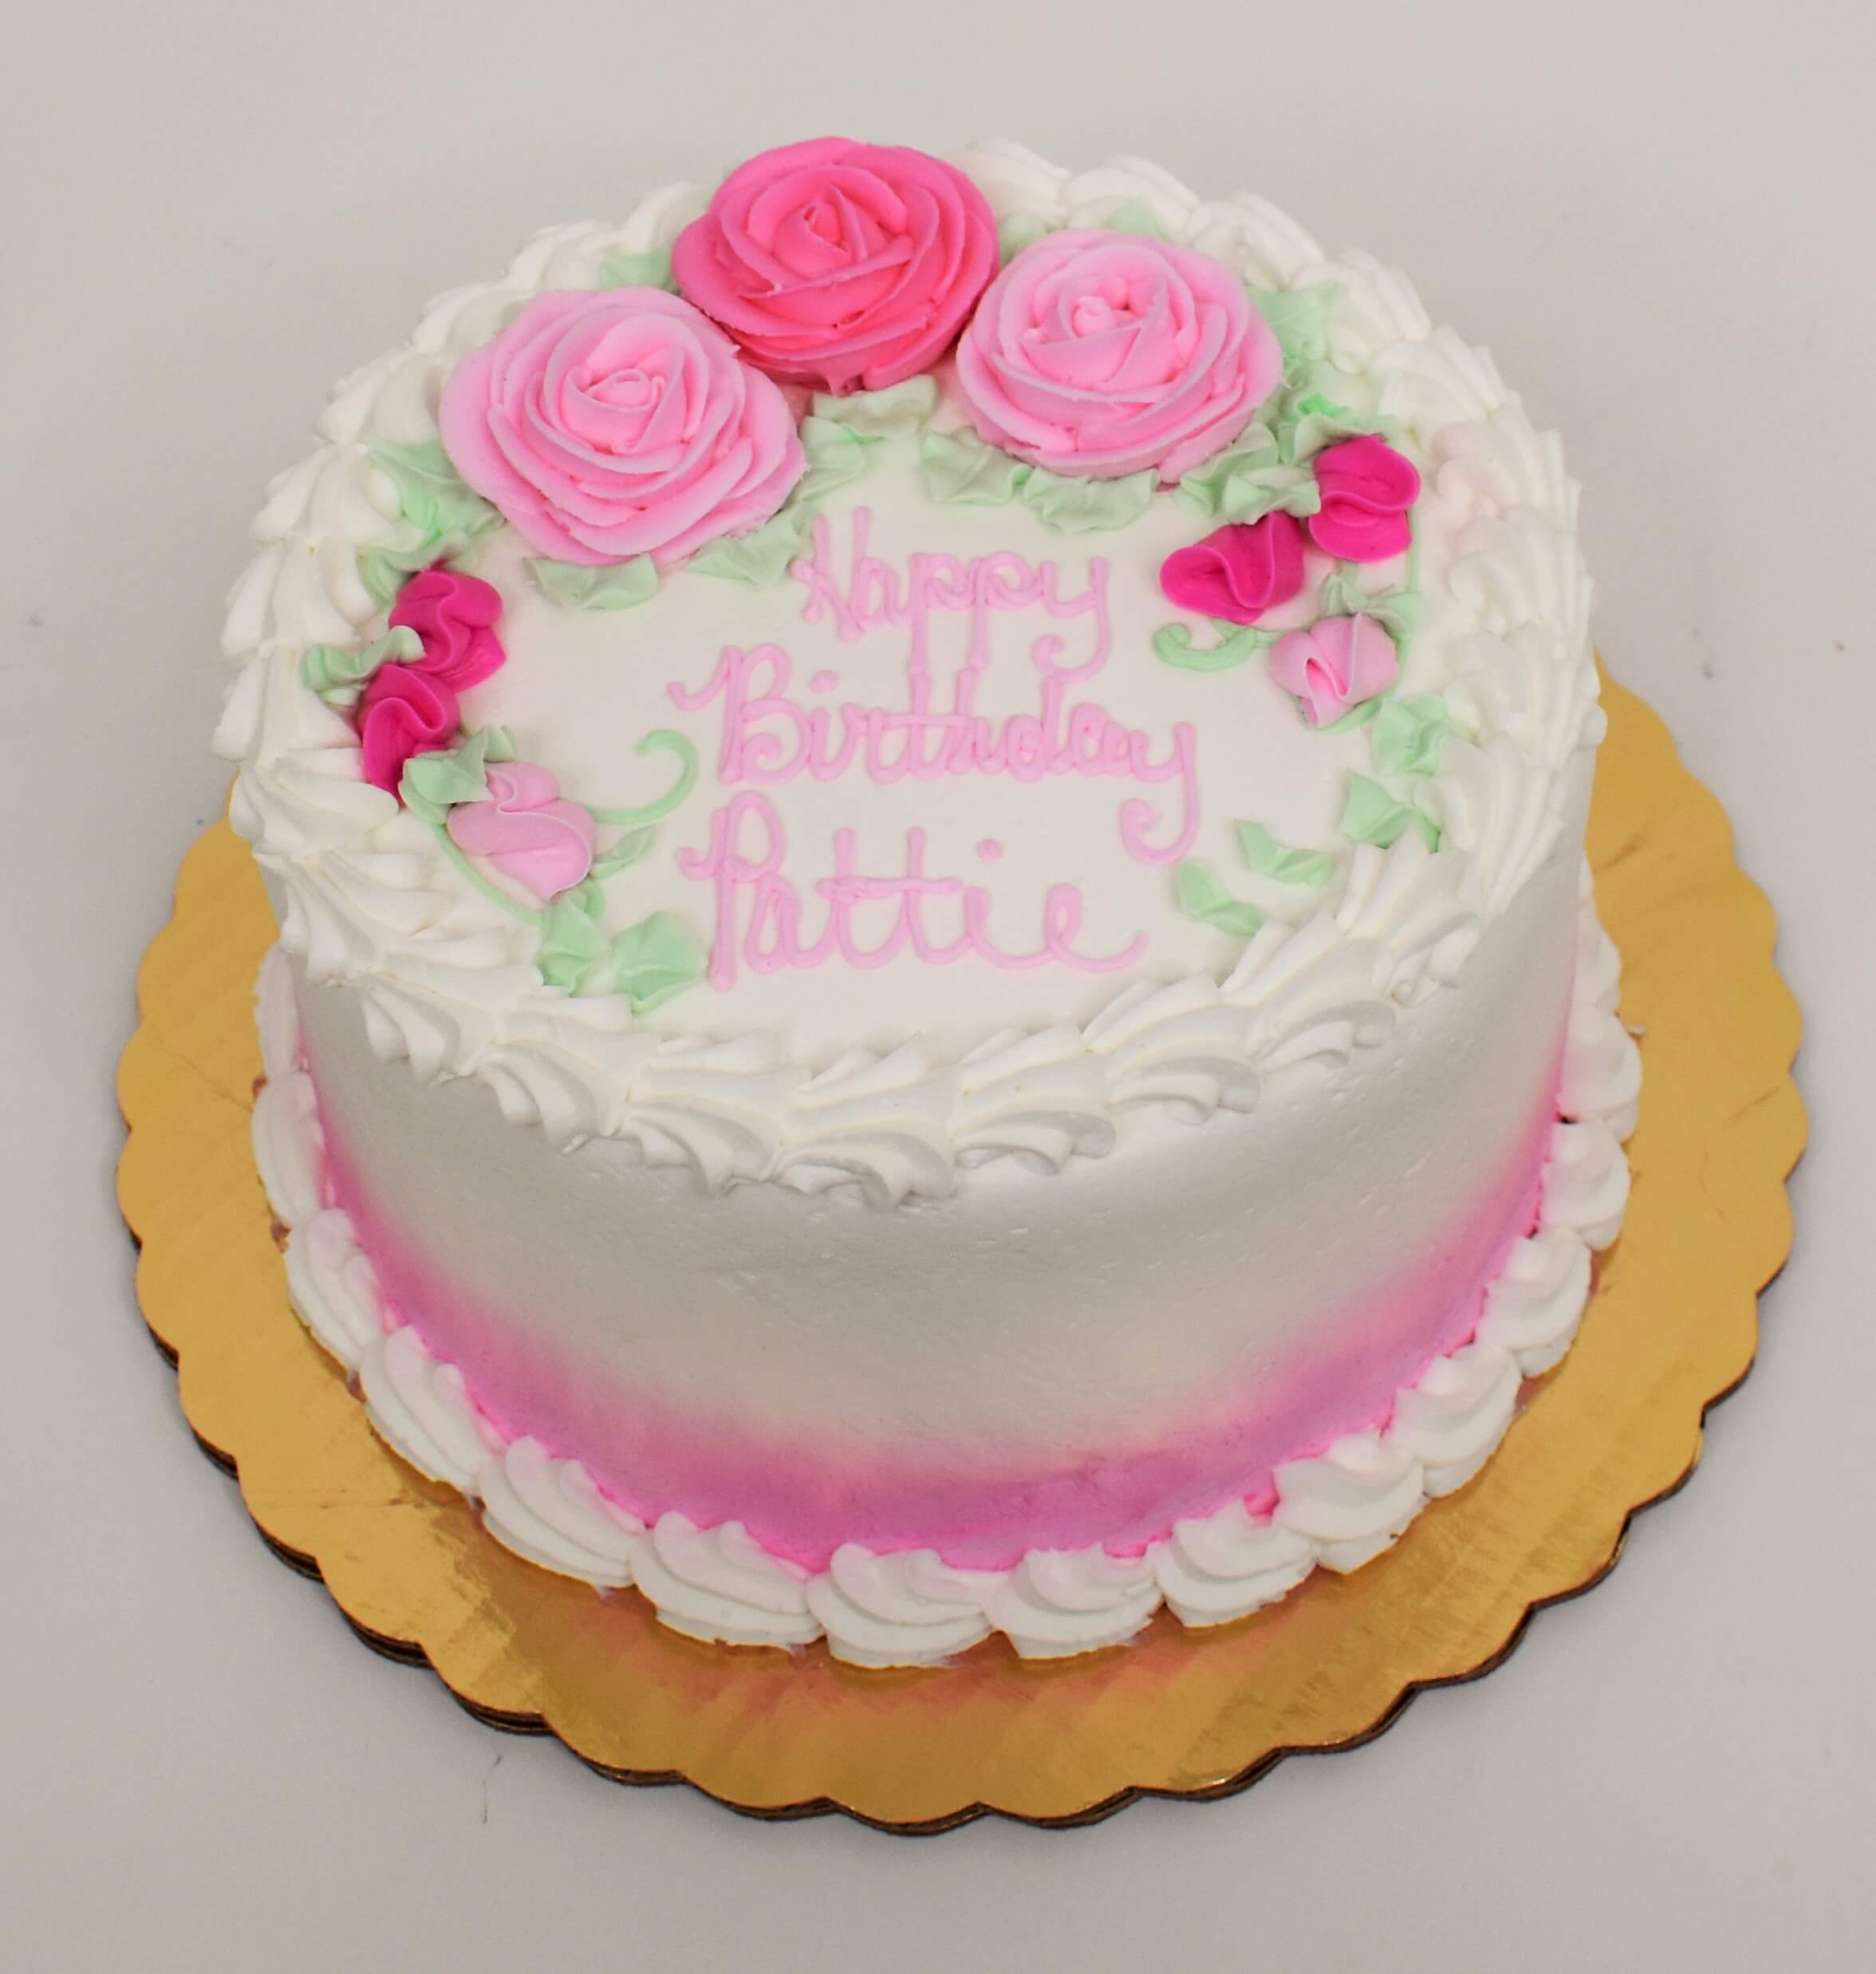 McArthur's Bakery Custom Cake With Pink Roses